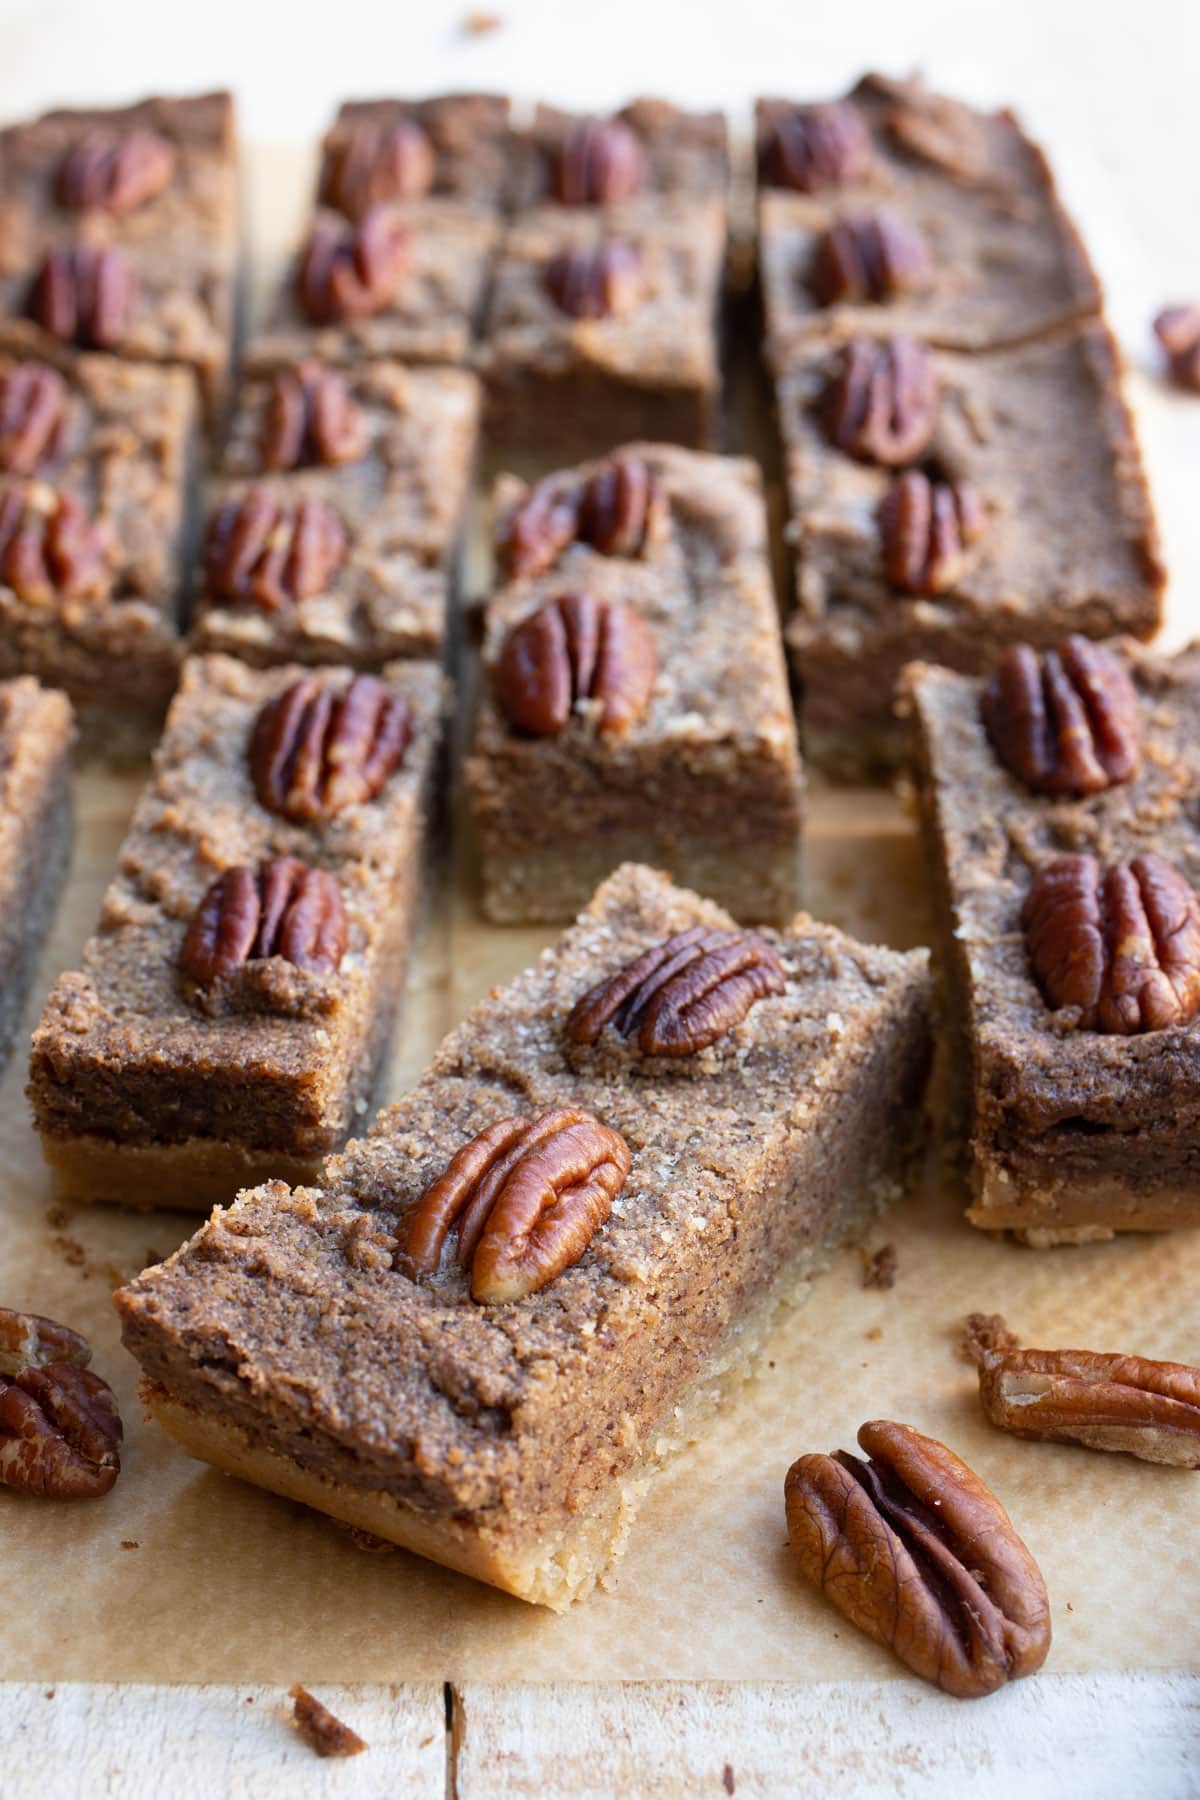 A pecan bar topped with pecan halves.